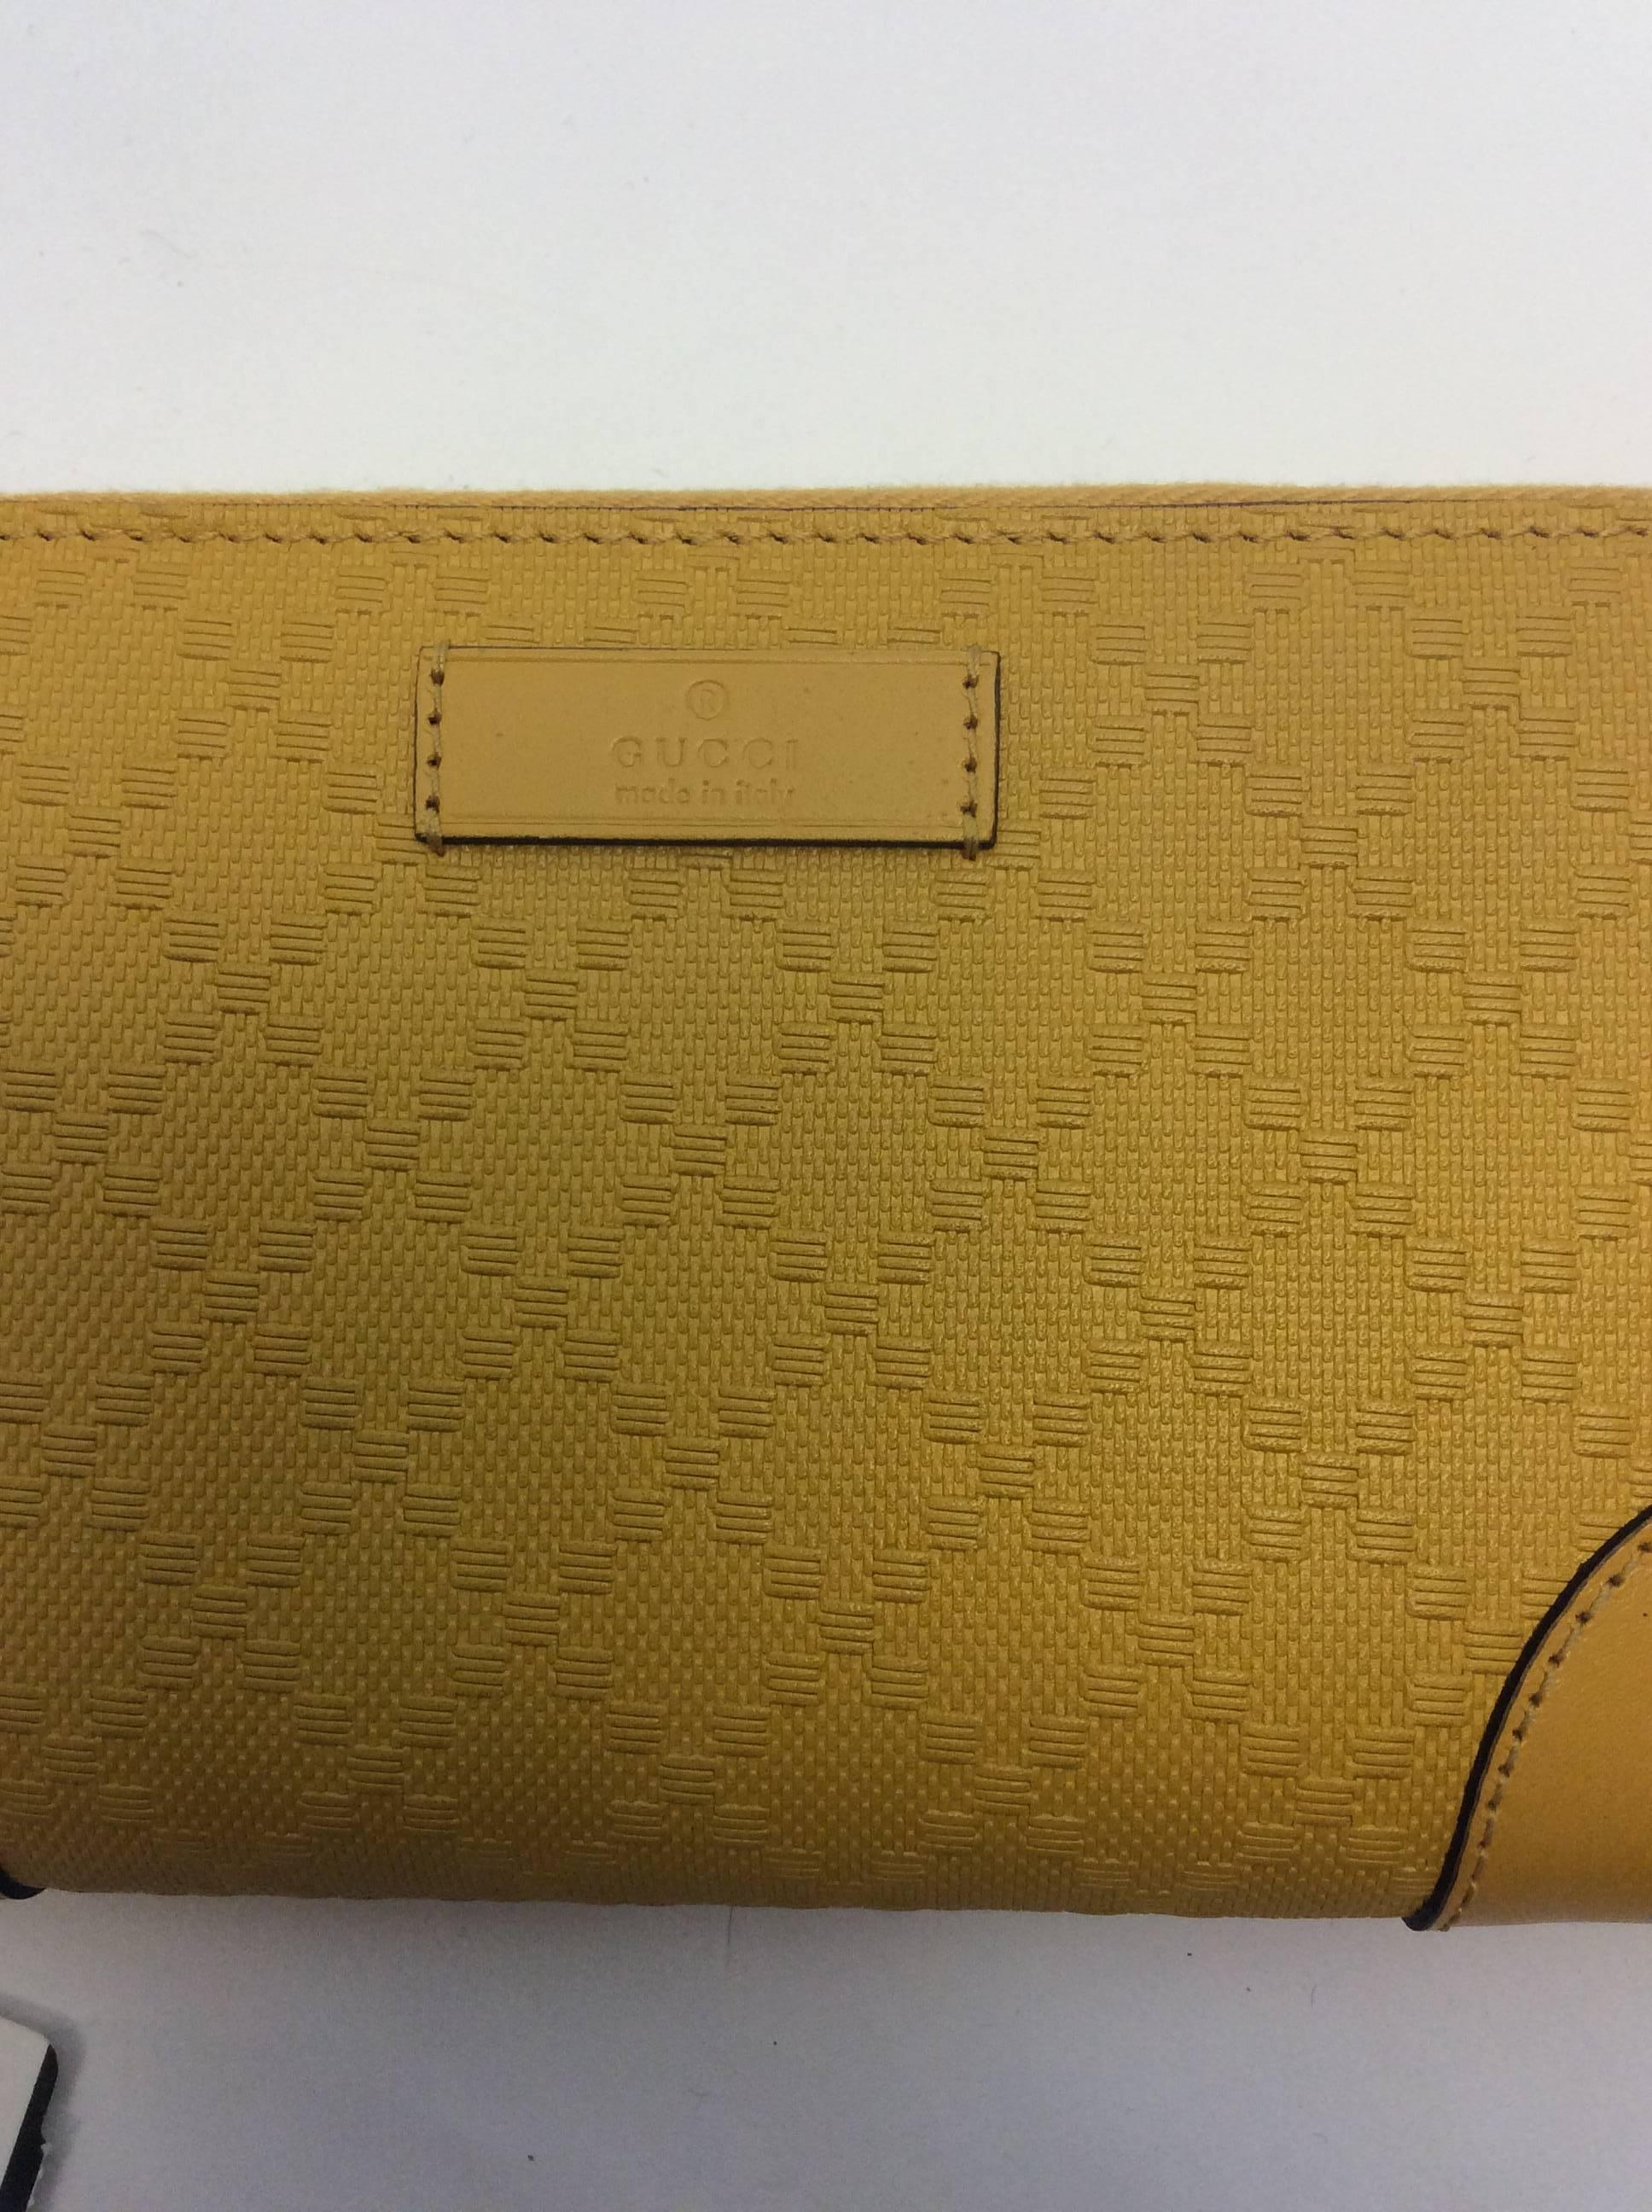 Gucci NIB Bright Yellow Diamante Wallet
Original Price: $570
New in box, with tags
Yellow canvas material with leather
Zip around style
Credit card slots & zipper section
Made in Italy